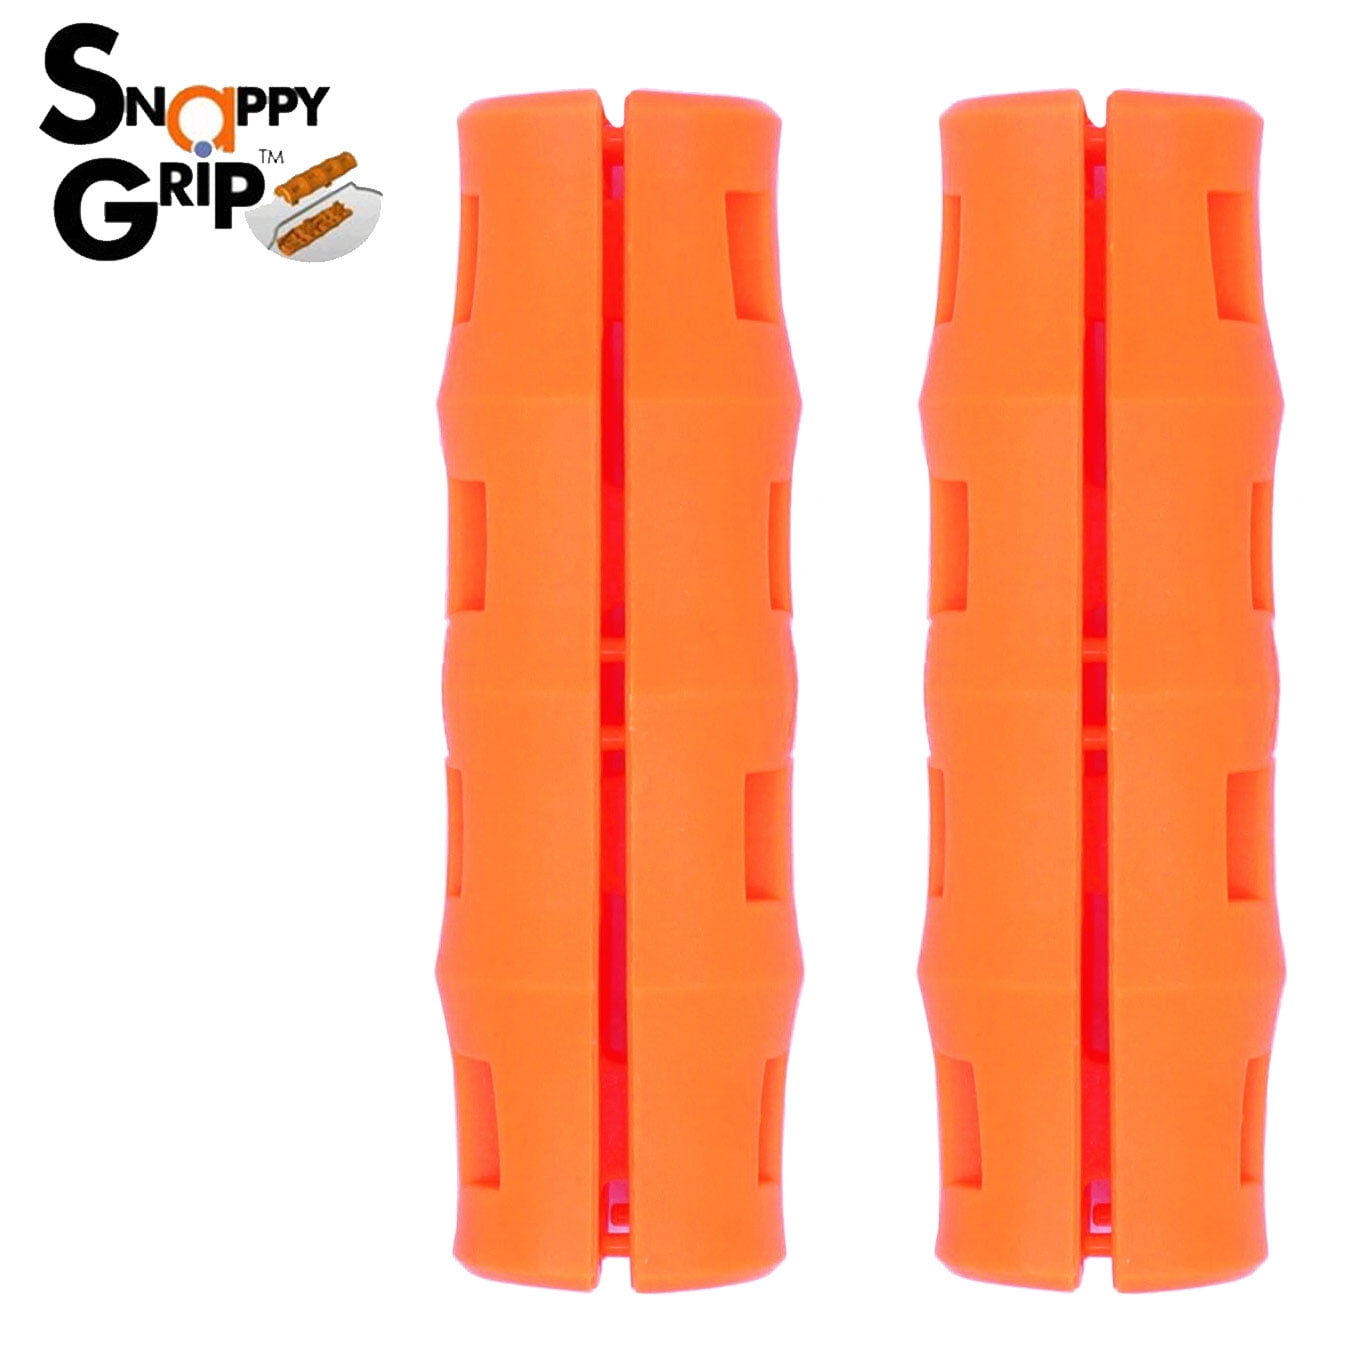 NEW Snappy Grip Ergonomic Replacement Bucket Handles 2 Pack Safety Orange